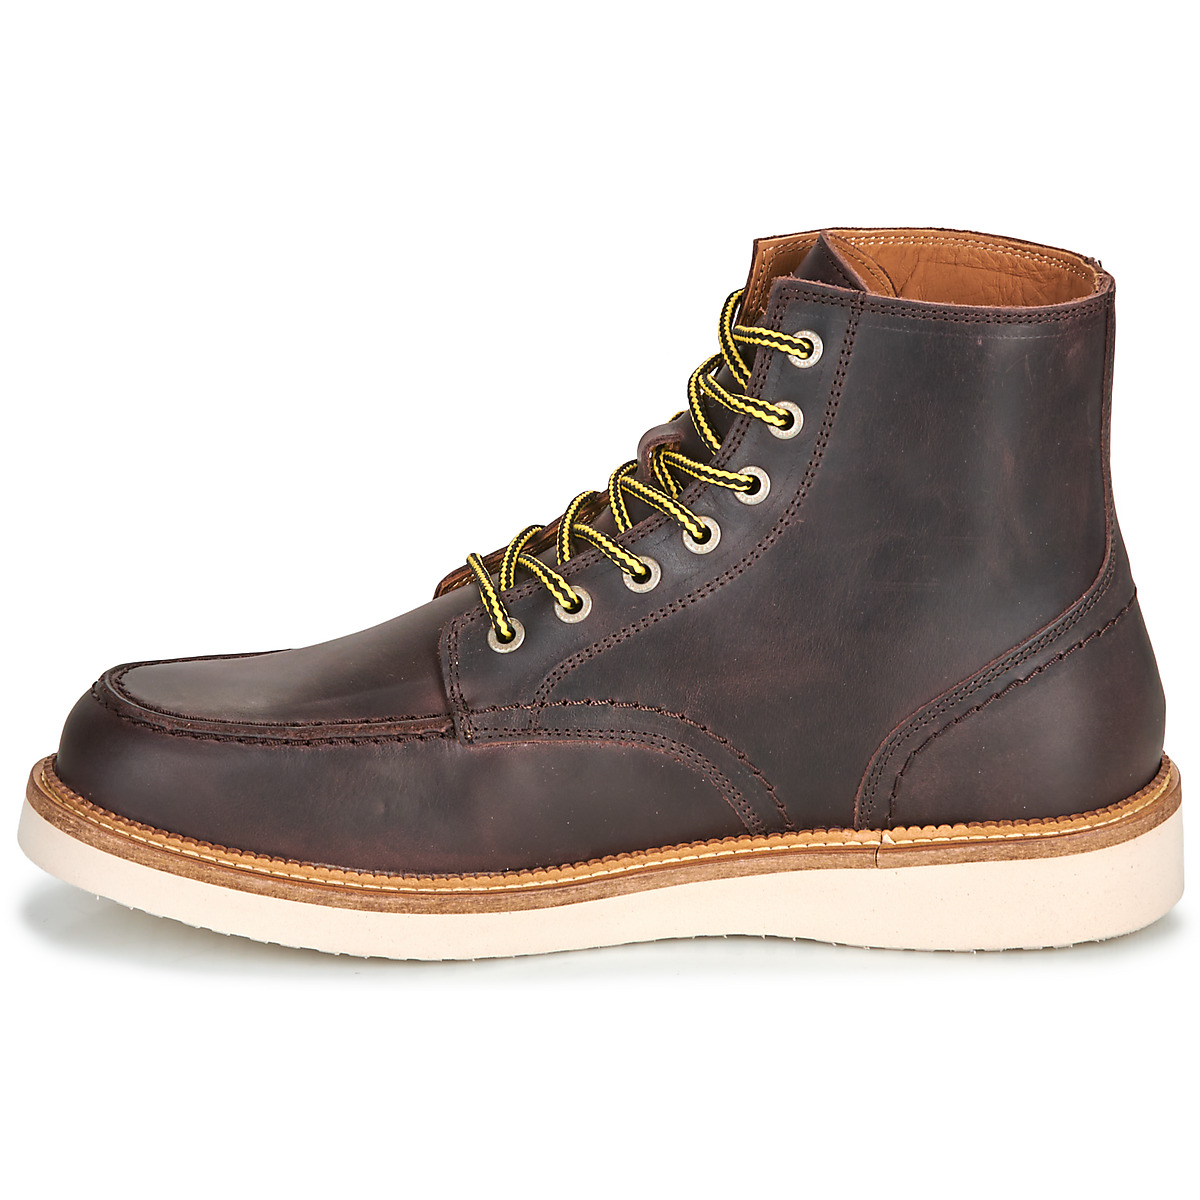 Selected MArron SLHTEO NEW LEATHER MOC-TOE BOOT t2GUyVuF